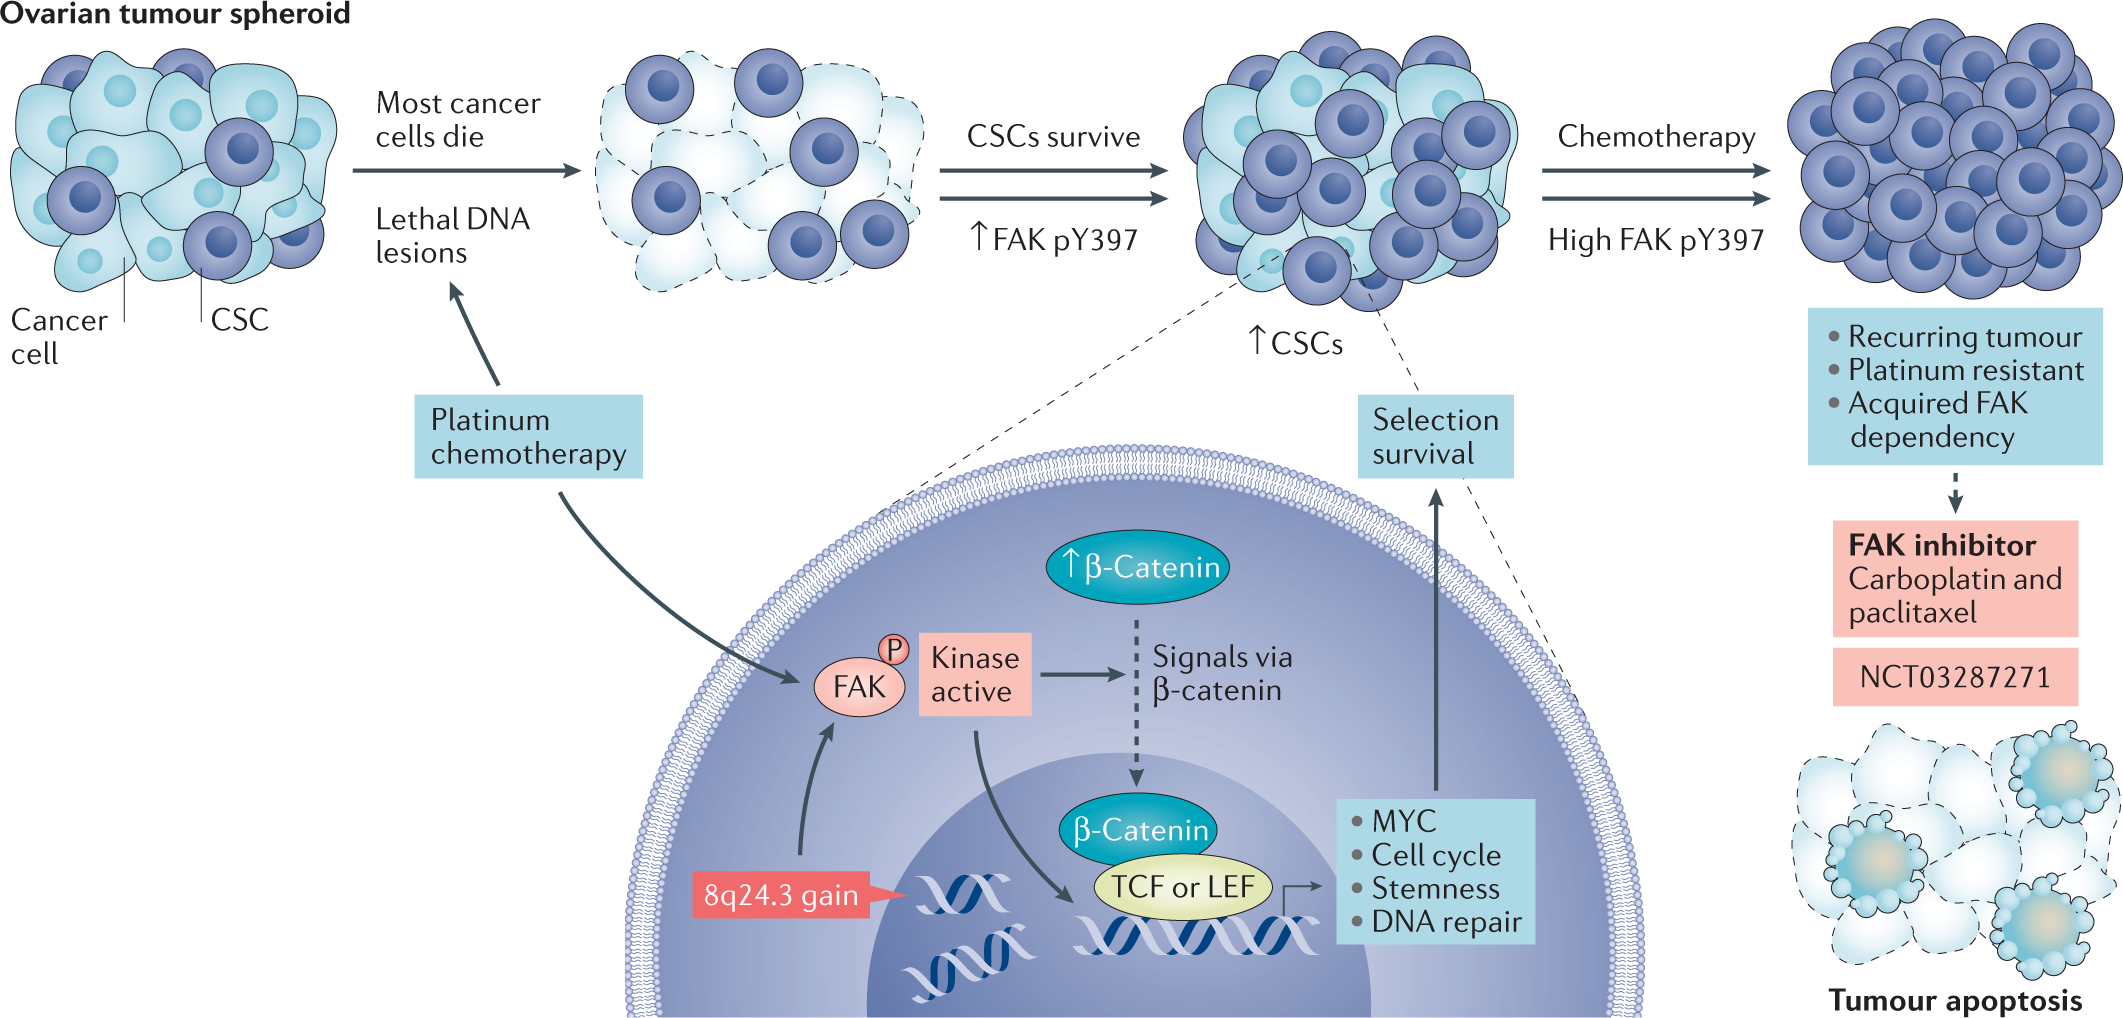 Targeting FAK in anticancer combination therapies | Nature Reviews Cancer